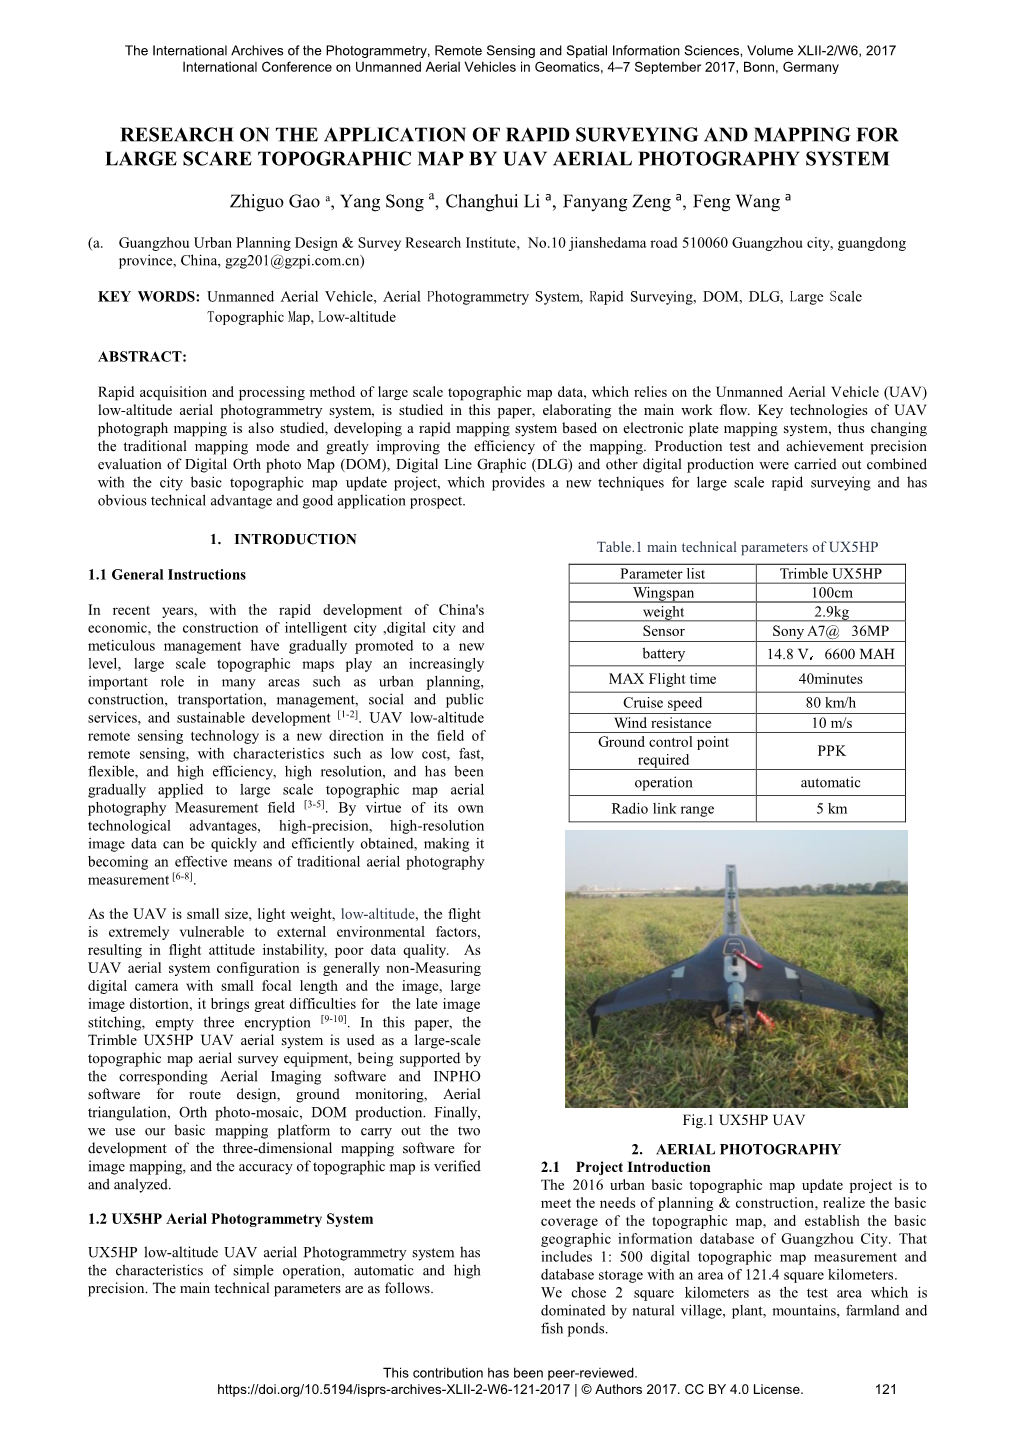 Research on the Application of Rapid Surveying and Mapping for Large Scare Topographic Map by Uav Aerial Photography System